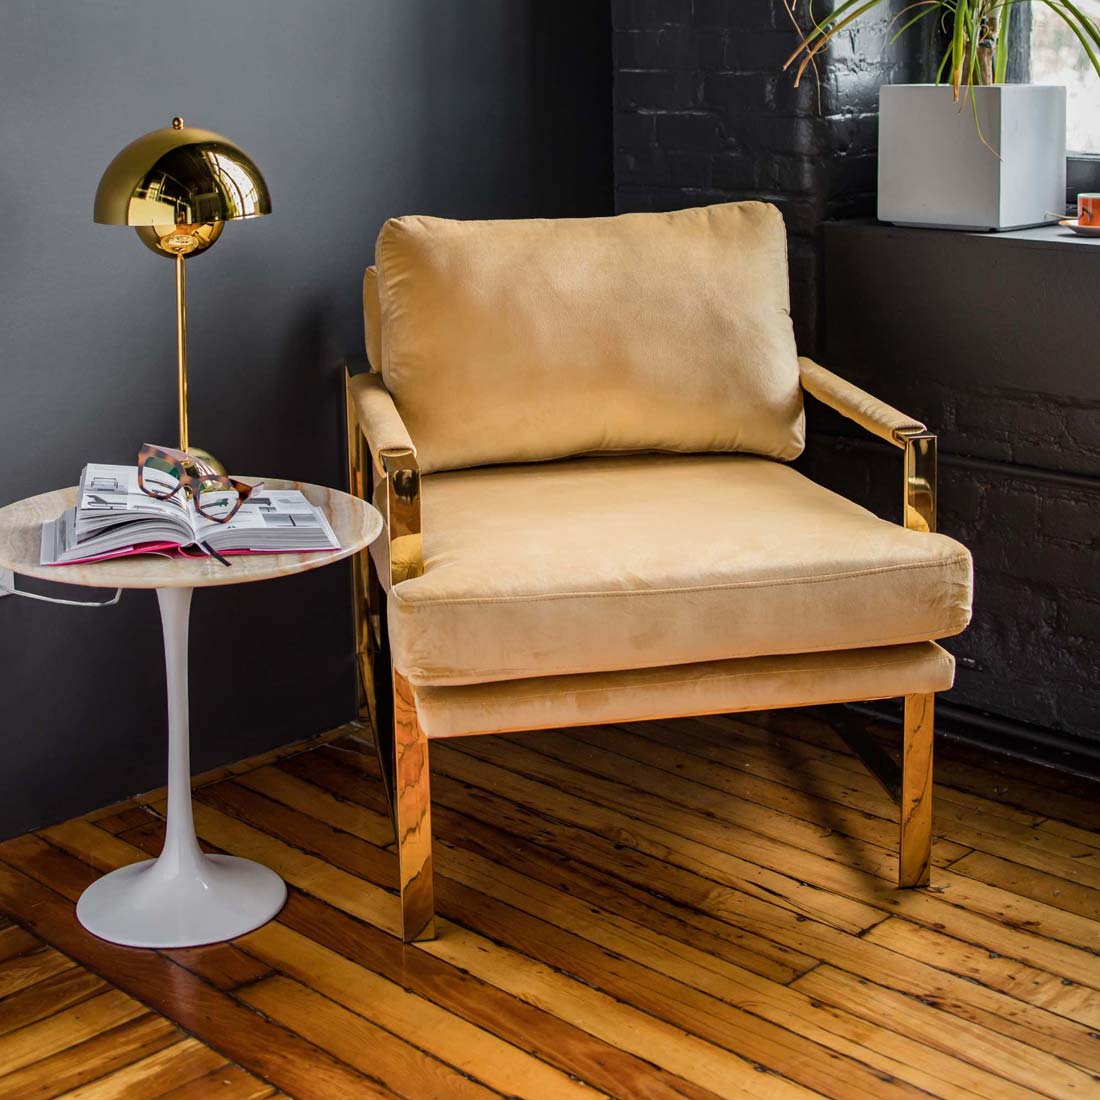 Tan and gold chair sitting on a hardwood floor, with a marble Tulip table beside it.